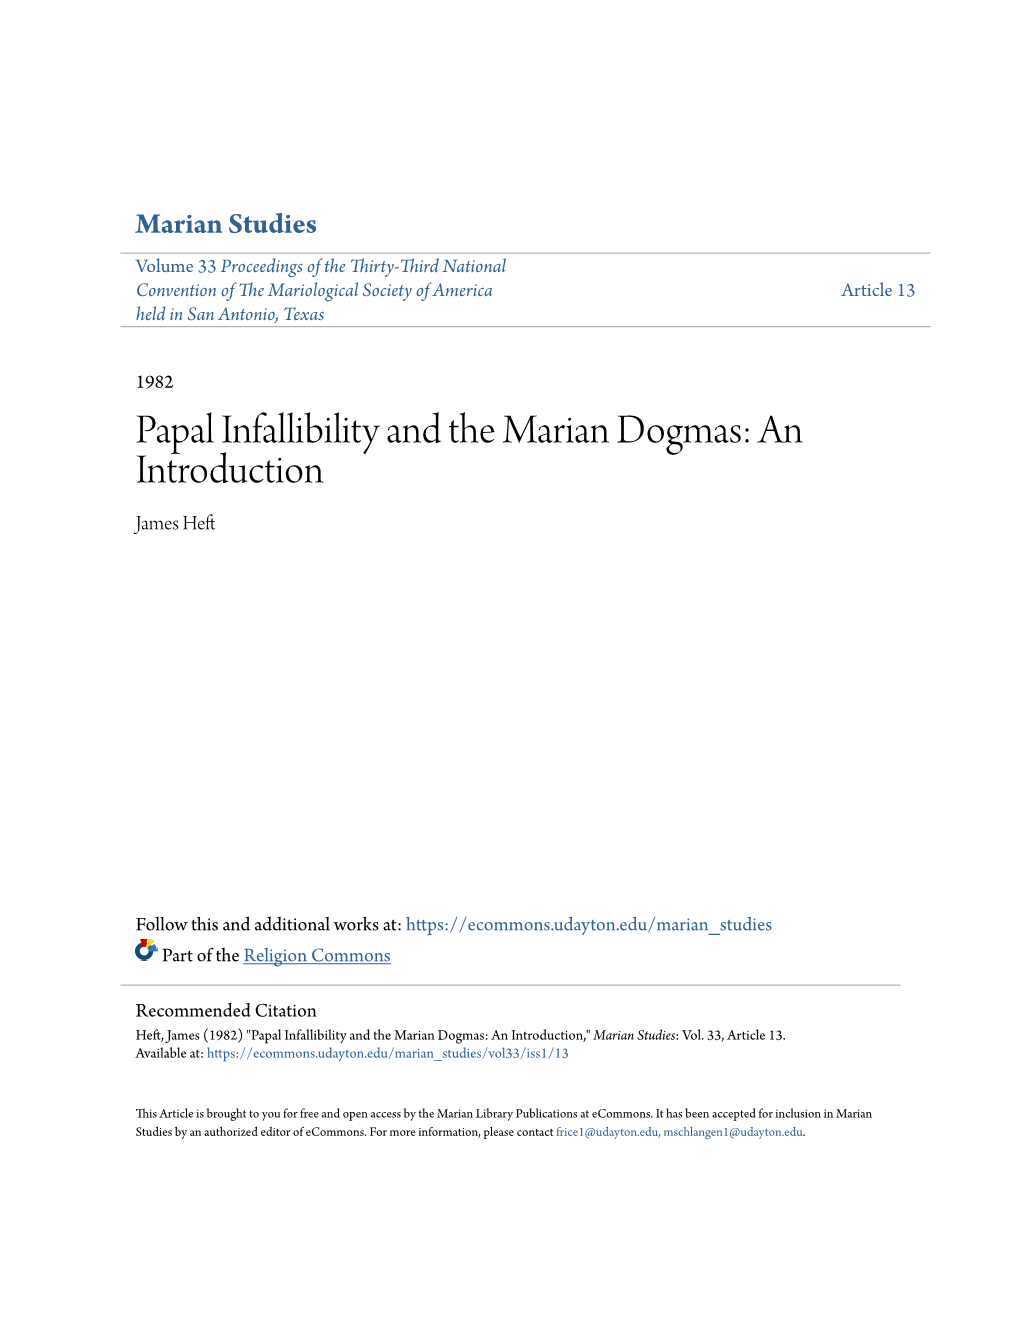 Papal Infallibility and the Marian Dogmas: an Introduction James Heft